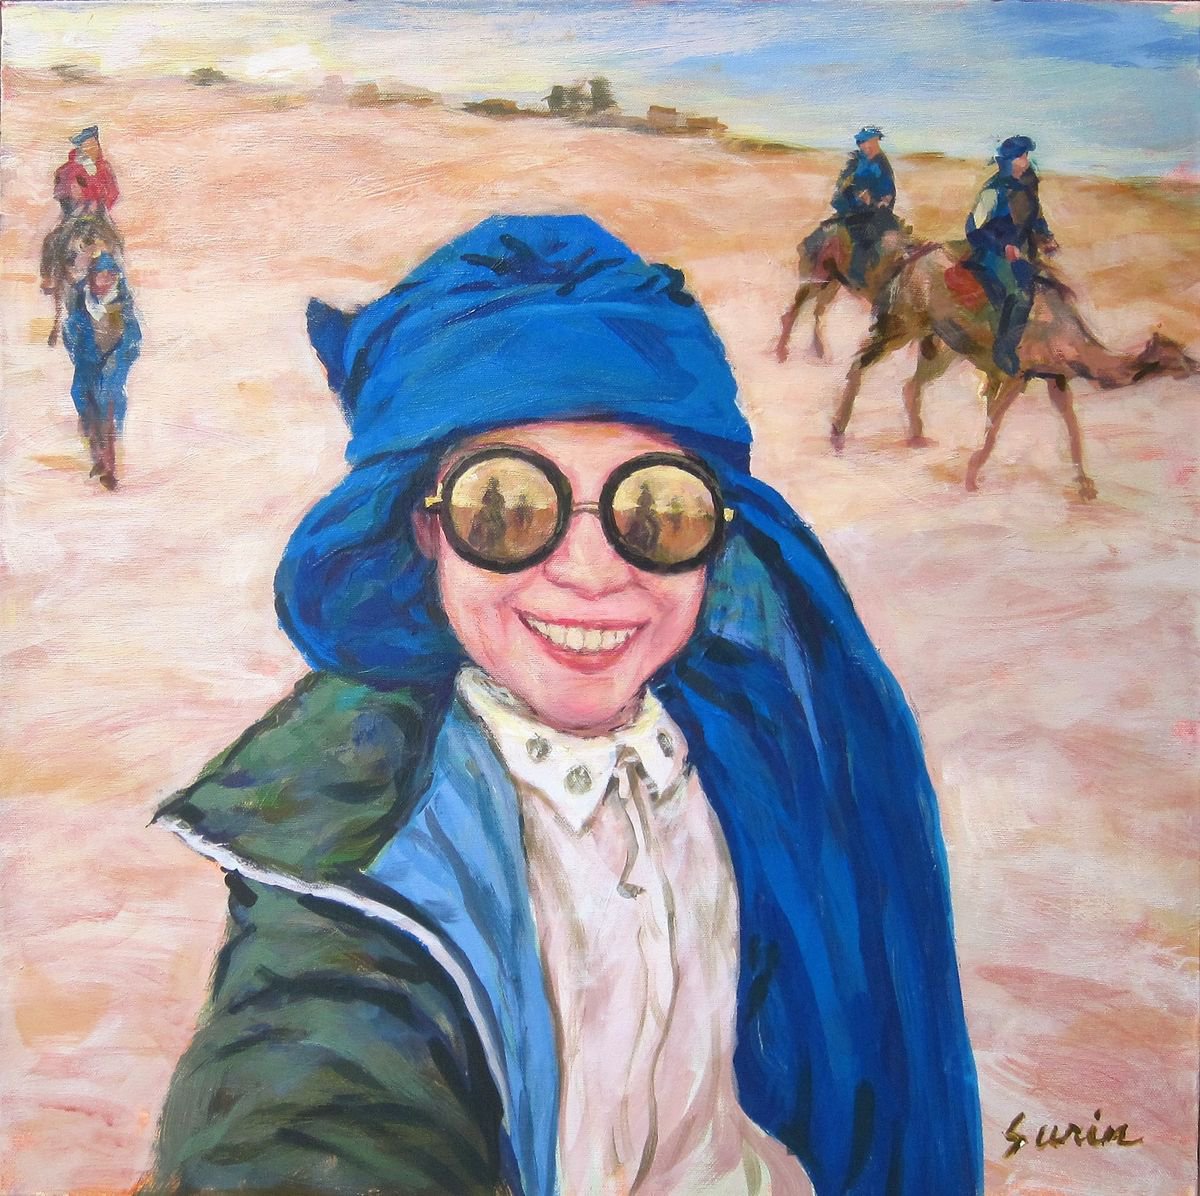 Selfie Morocco by Surin Jung